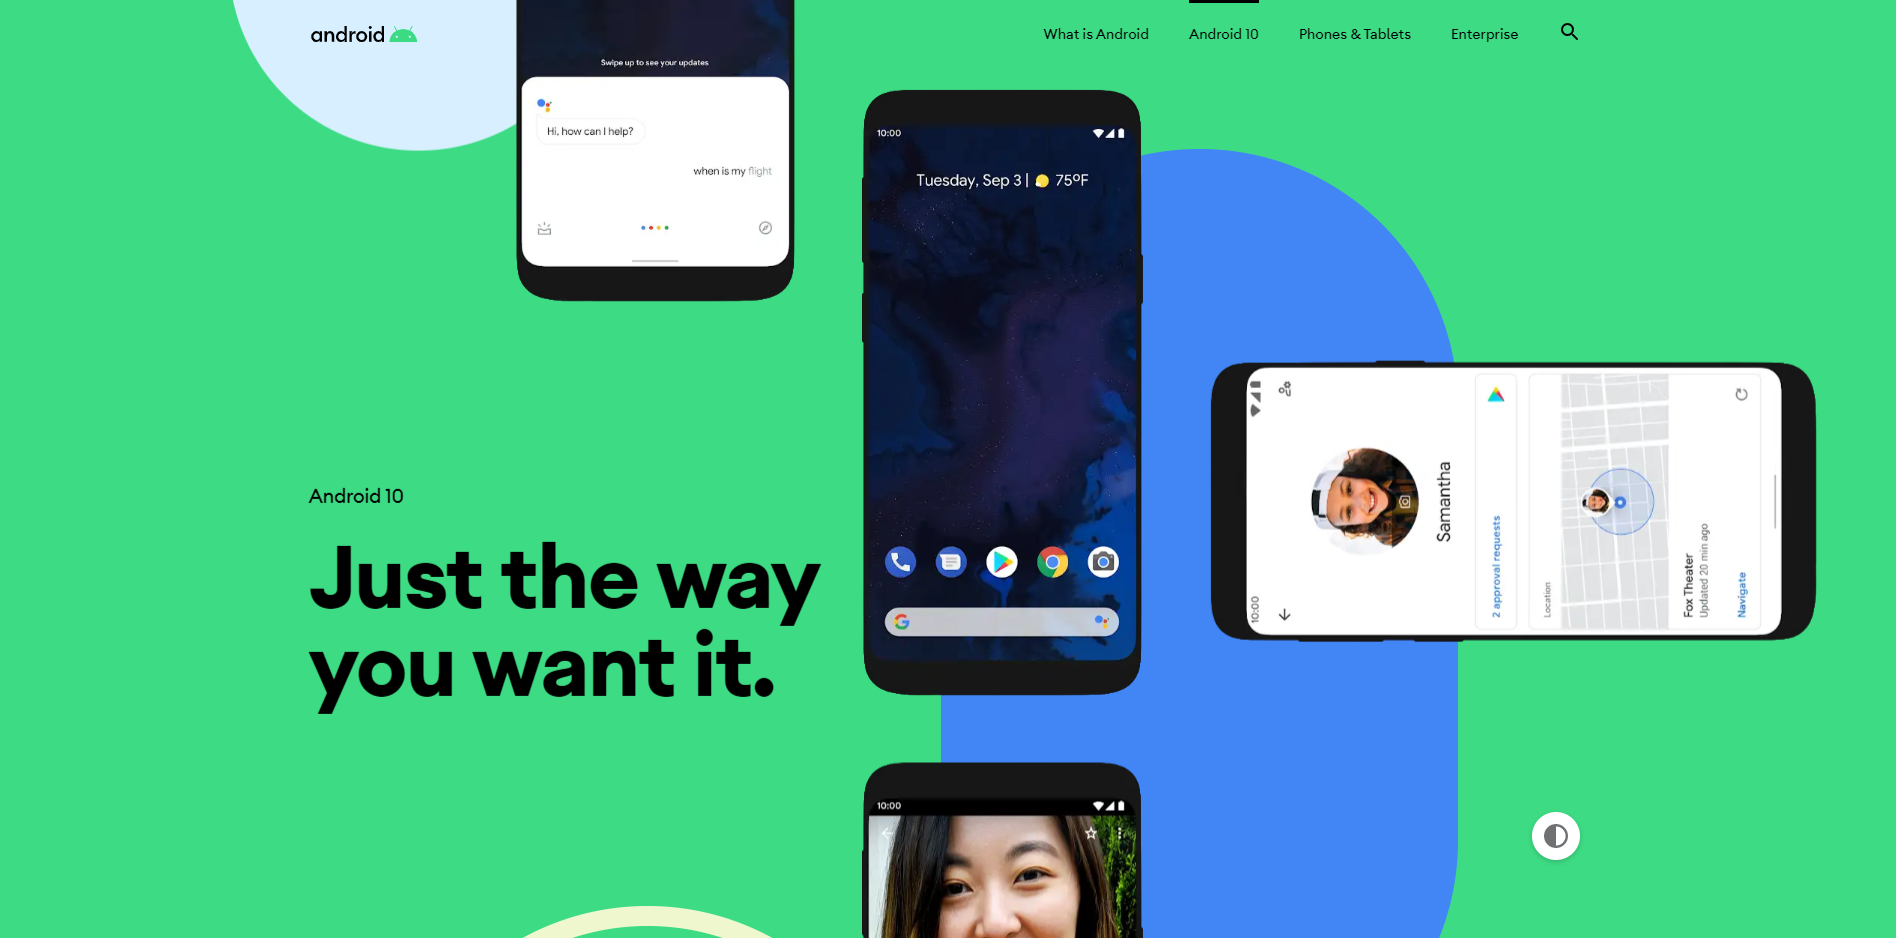 the android 10 landing page